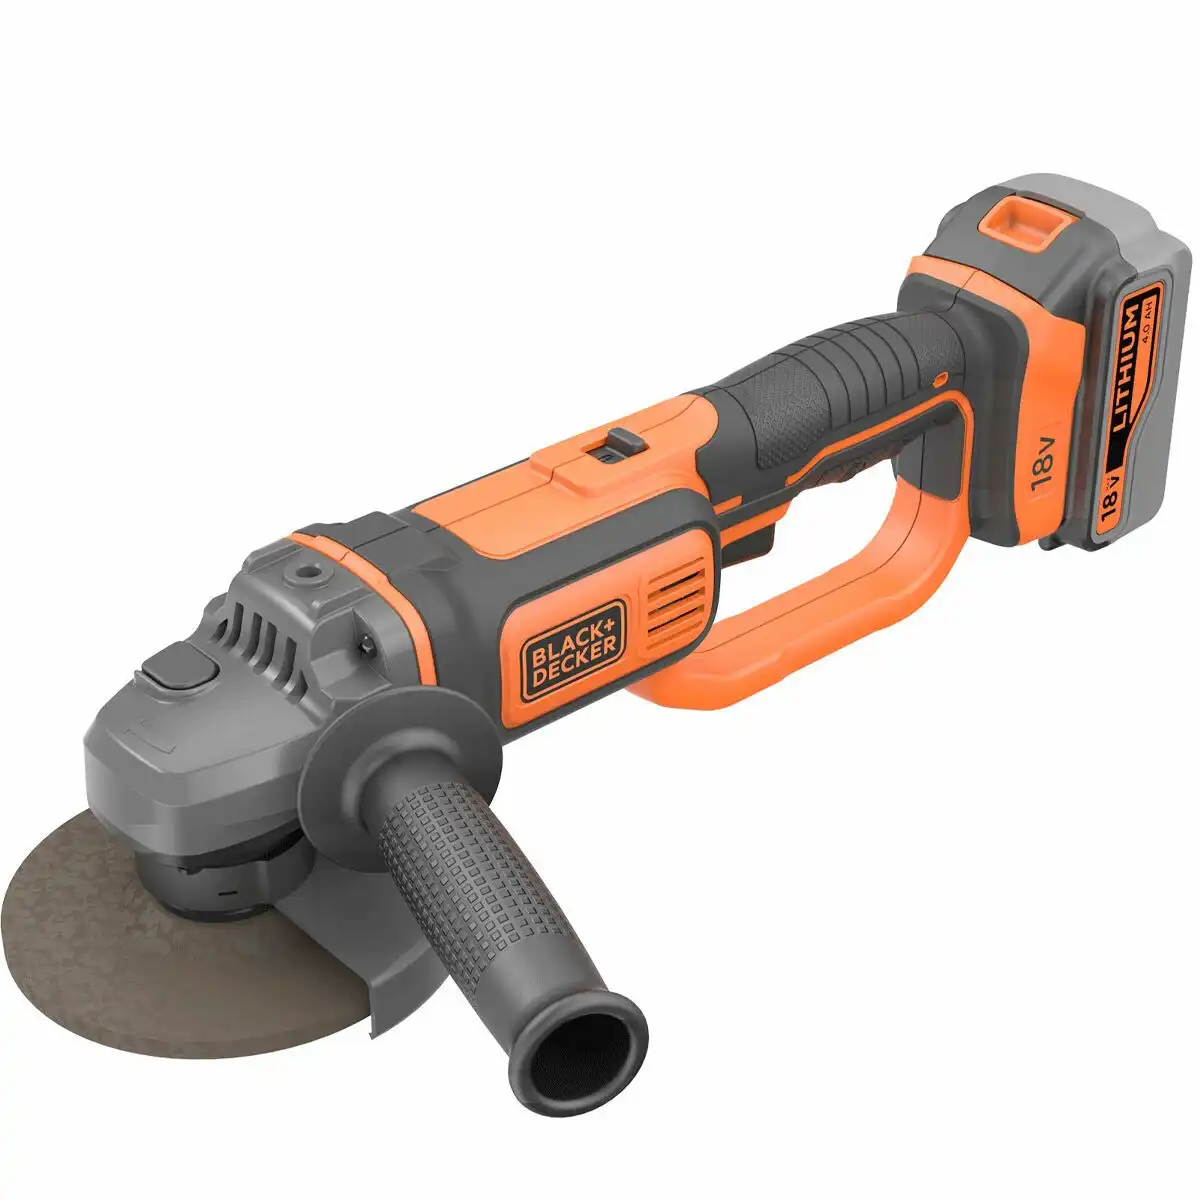 Black & Decker 18V Lithium-Ion Cordless Angle Grinder without Battery and Charger